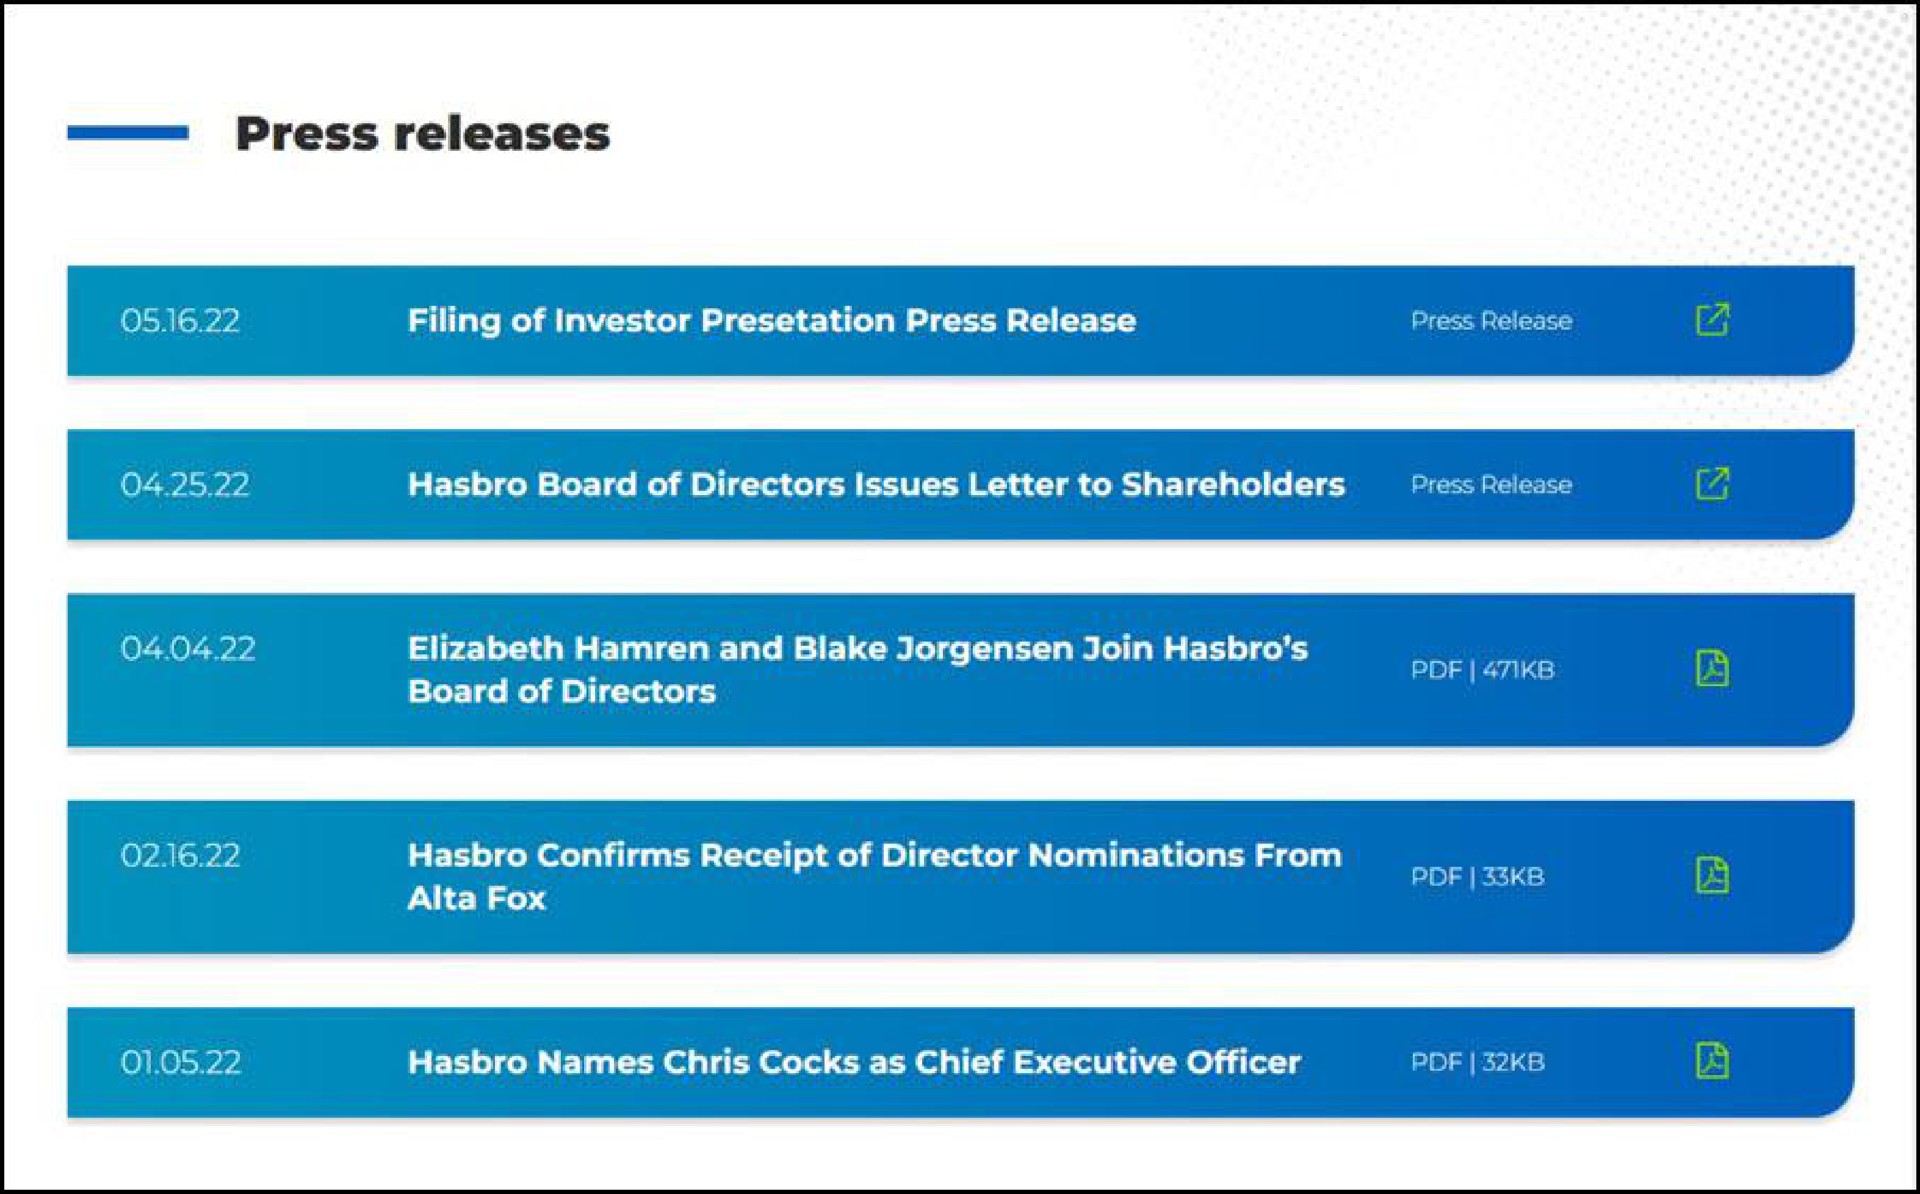 filing of investor press release at deal board of directors confirms receipt of director nominations from fox | Hasbro